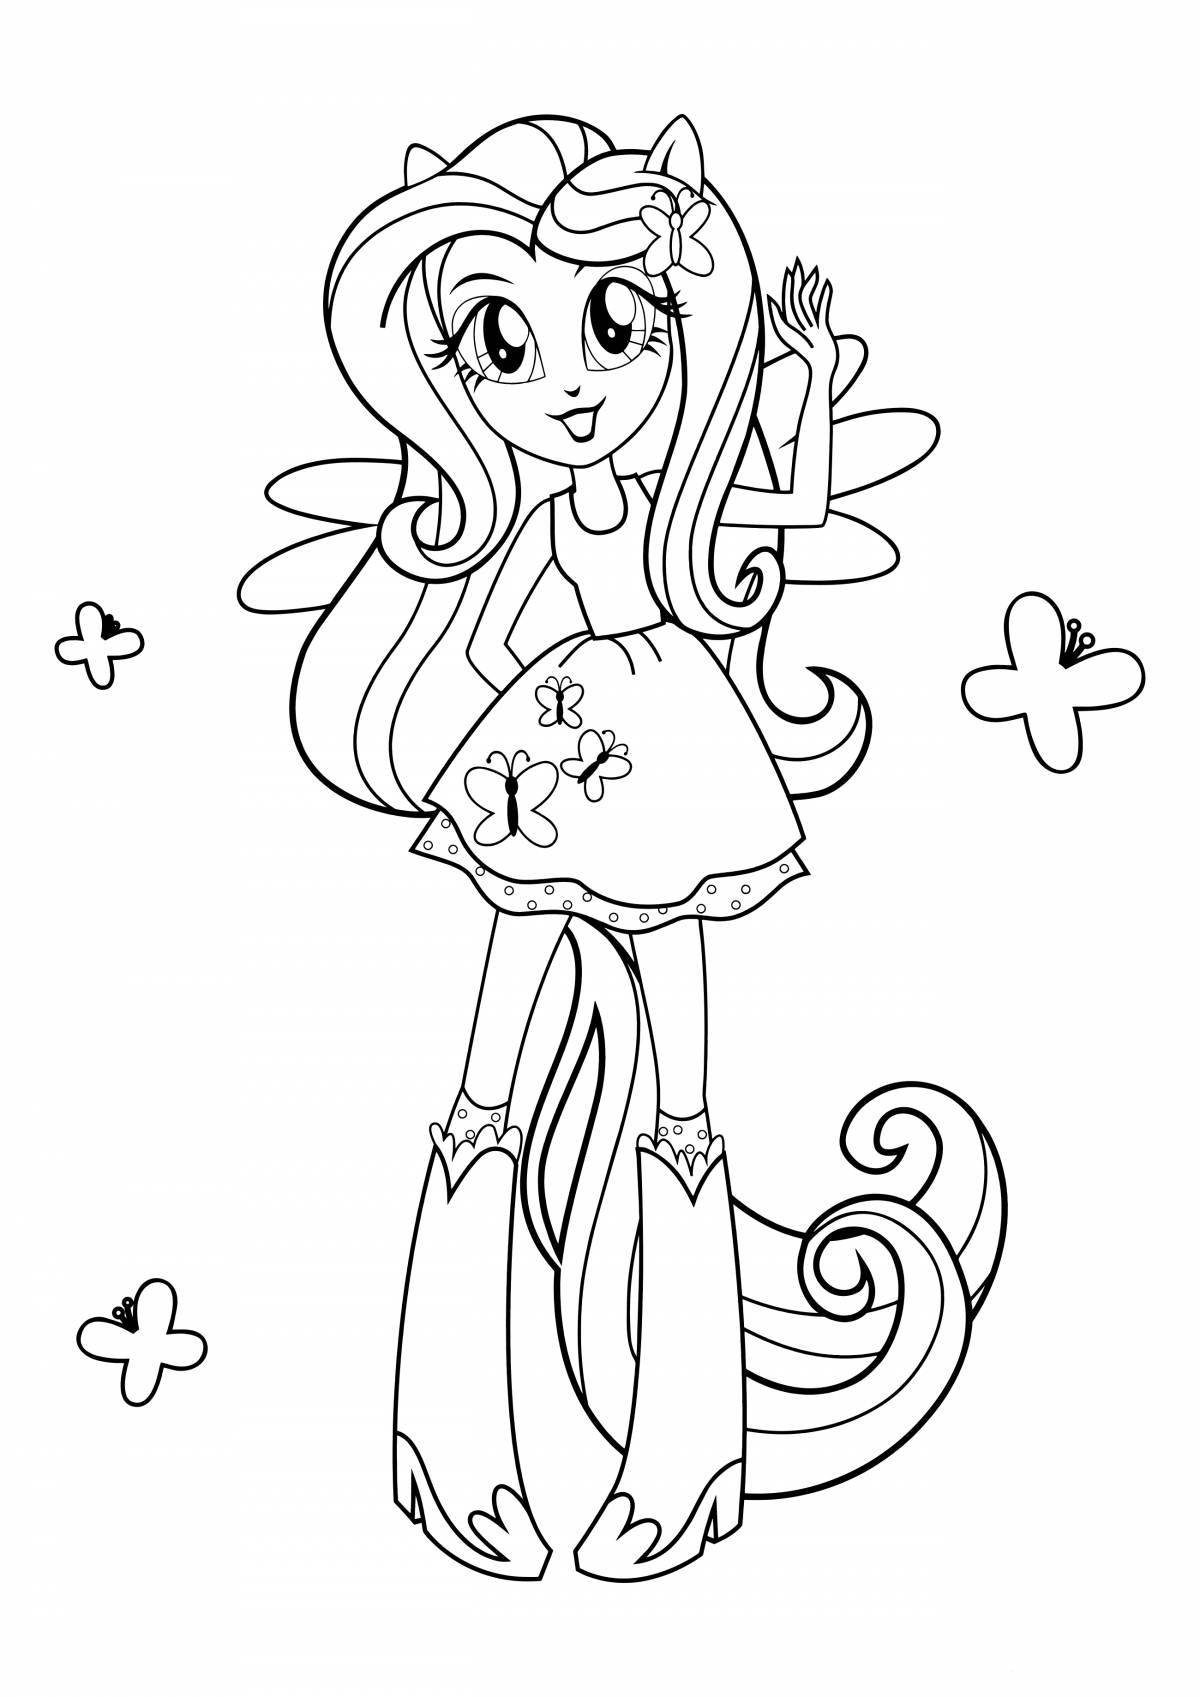 Amazing pony people coloring pages